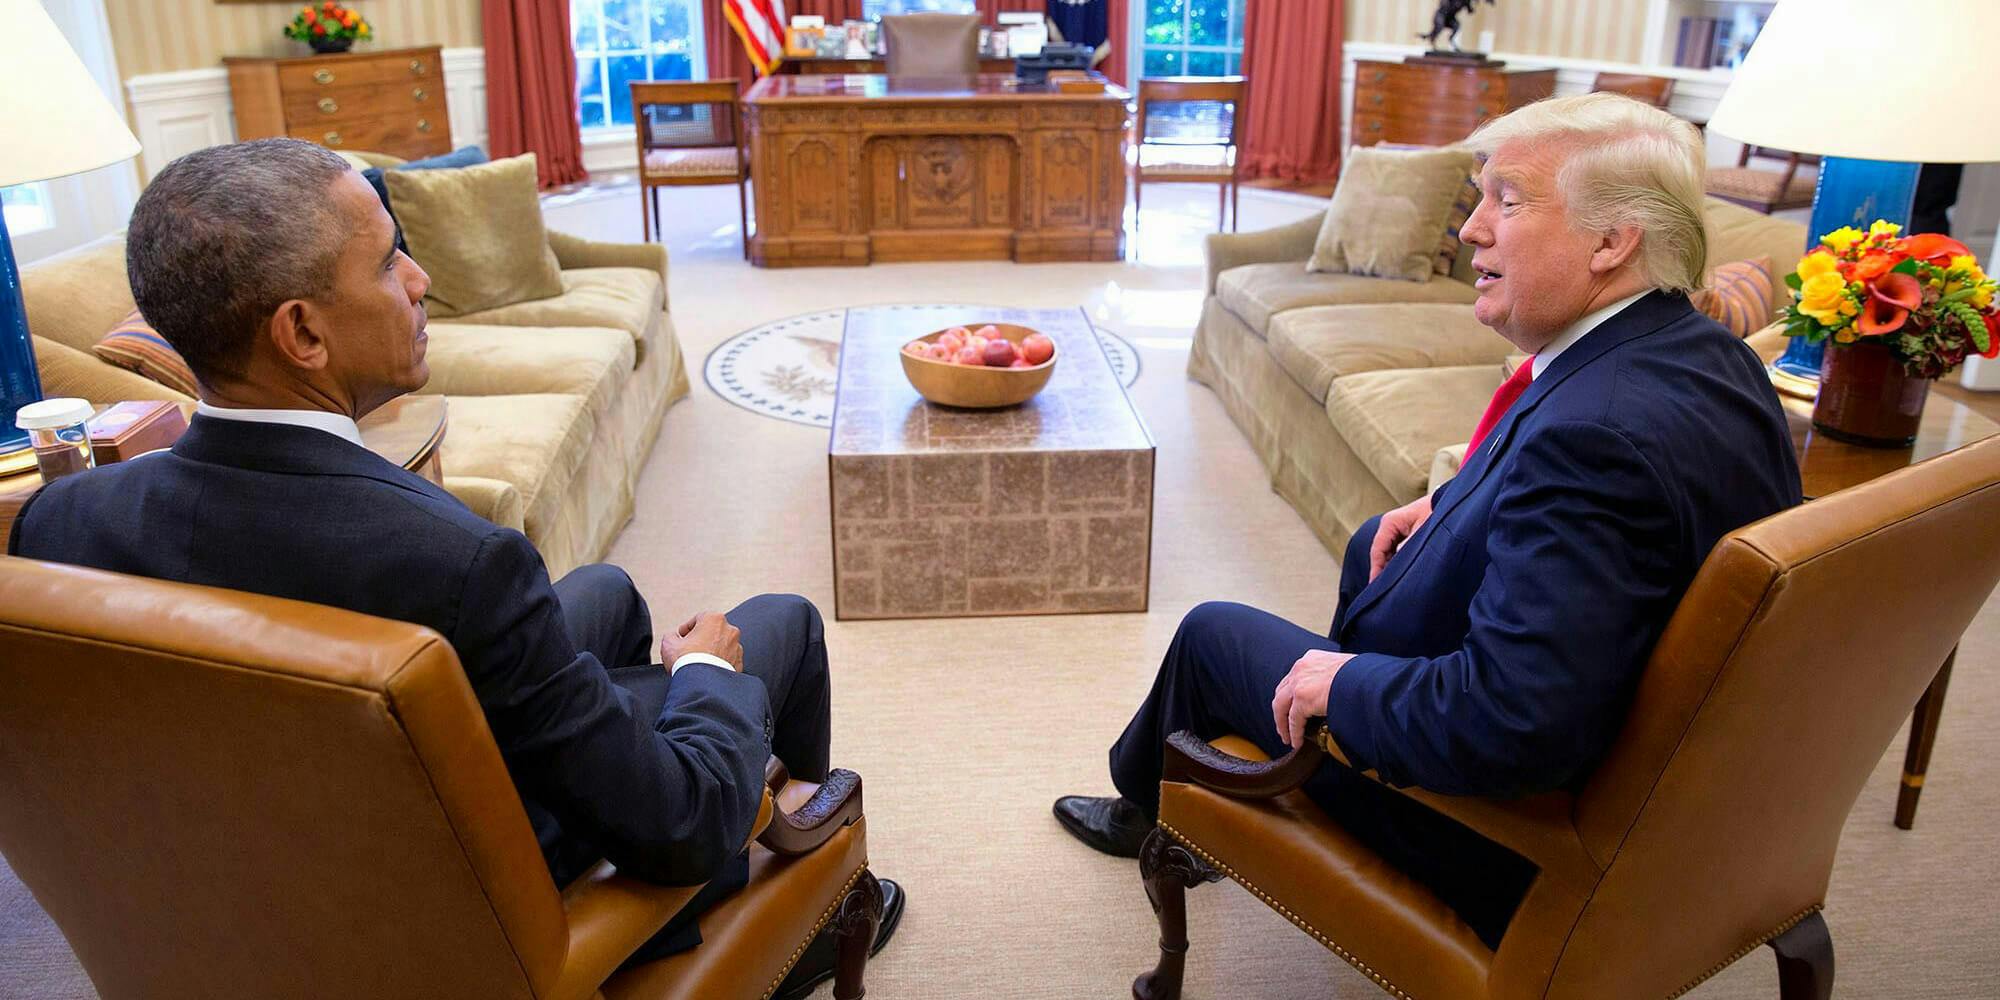 Barack Obama and Donald Trump in the Oval Office